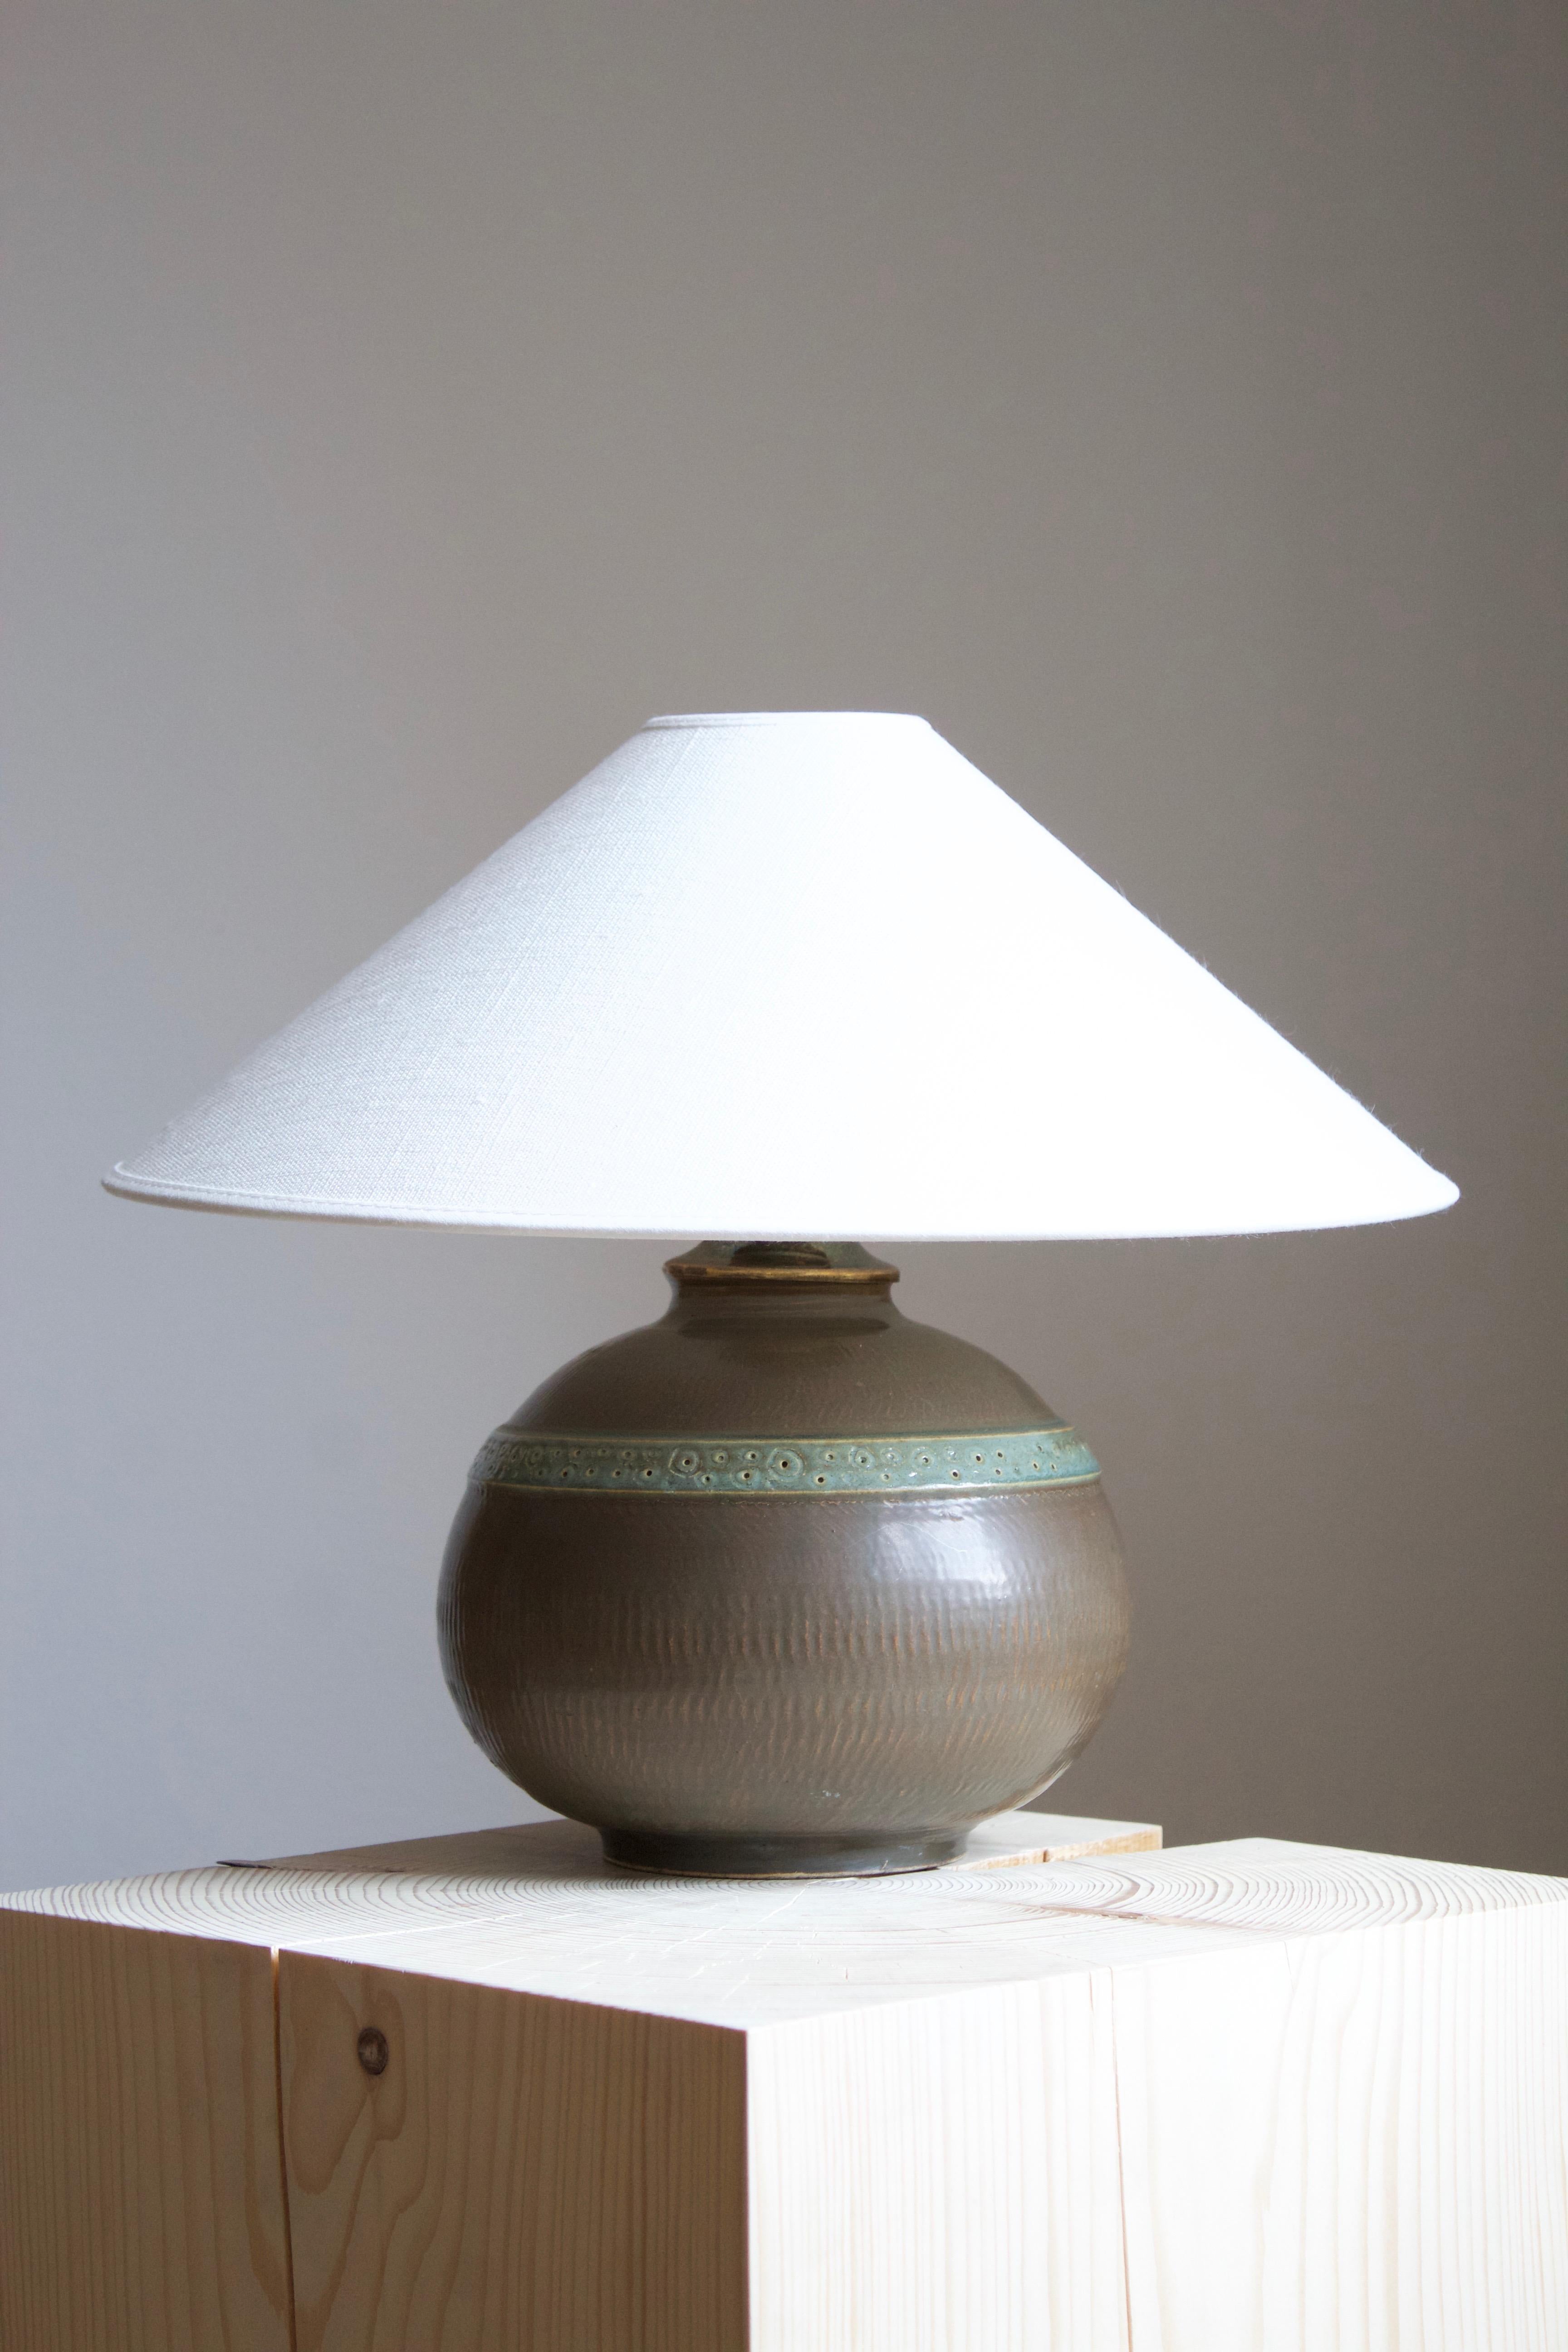 A table lamp or desk lamp designed and produced by Stig Lindberg. Produced by Gustavsberg. 

Marked with the Studio mark, separating this work from the large-scale production series by the maker.

Glaze features brown-green colors.

Stated